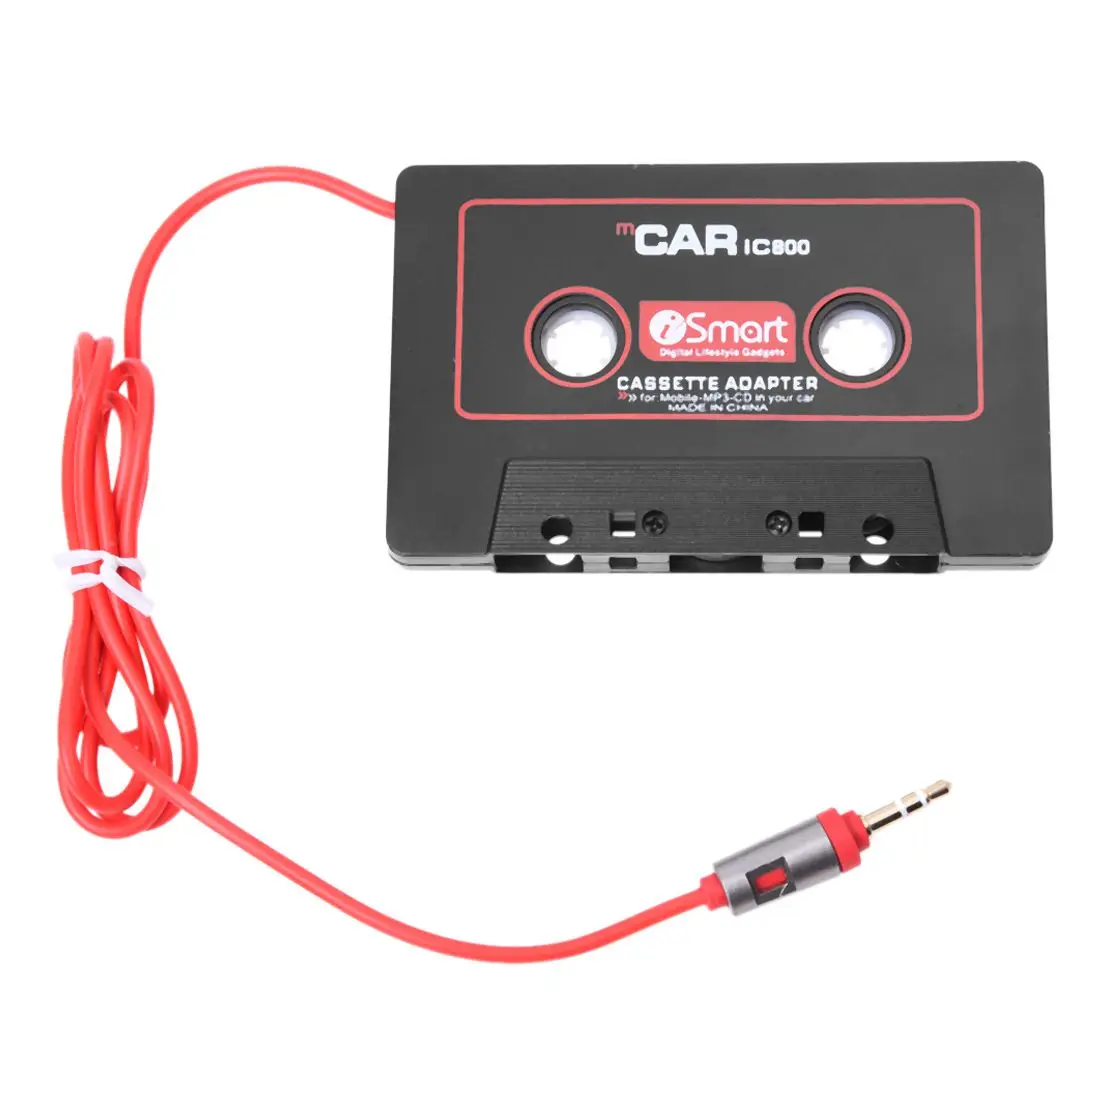 Фото Car Audio Systems Stereo Cassette Tape Adapter for Mobile Phone MP3 AUX CD Player 3.5mm Jack Truck Van | Электроника